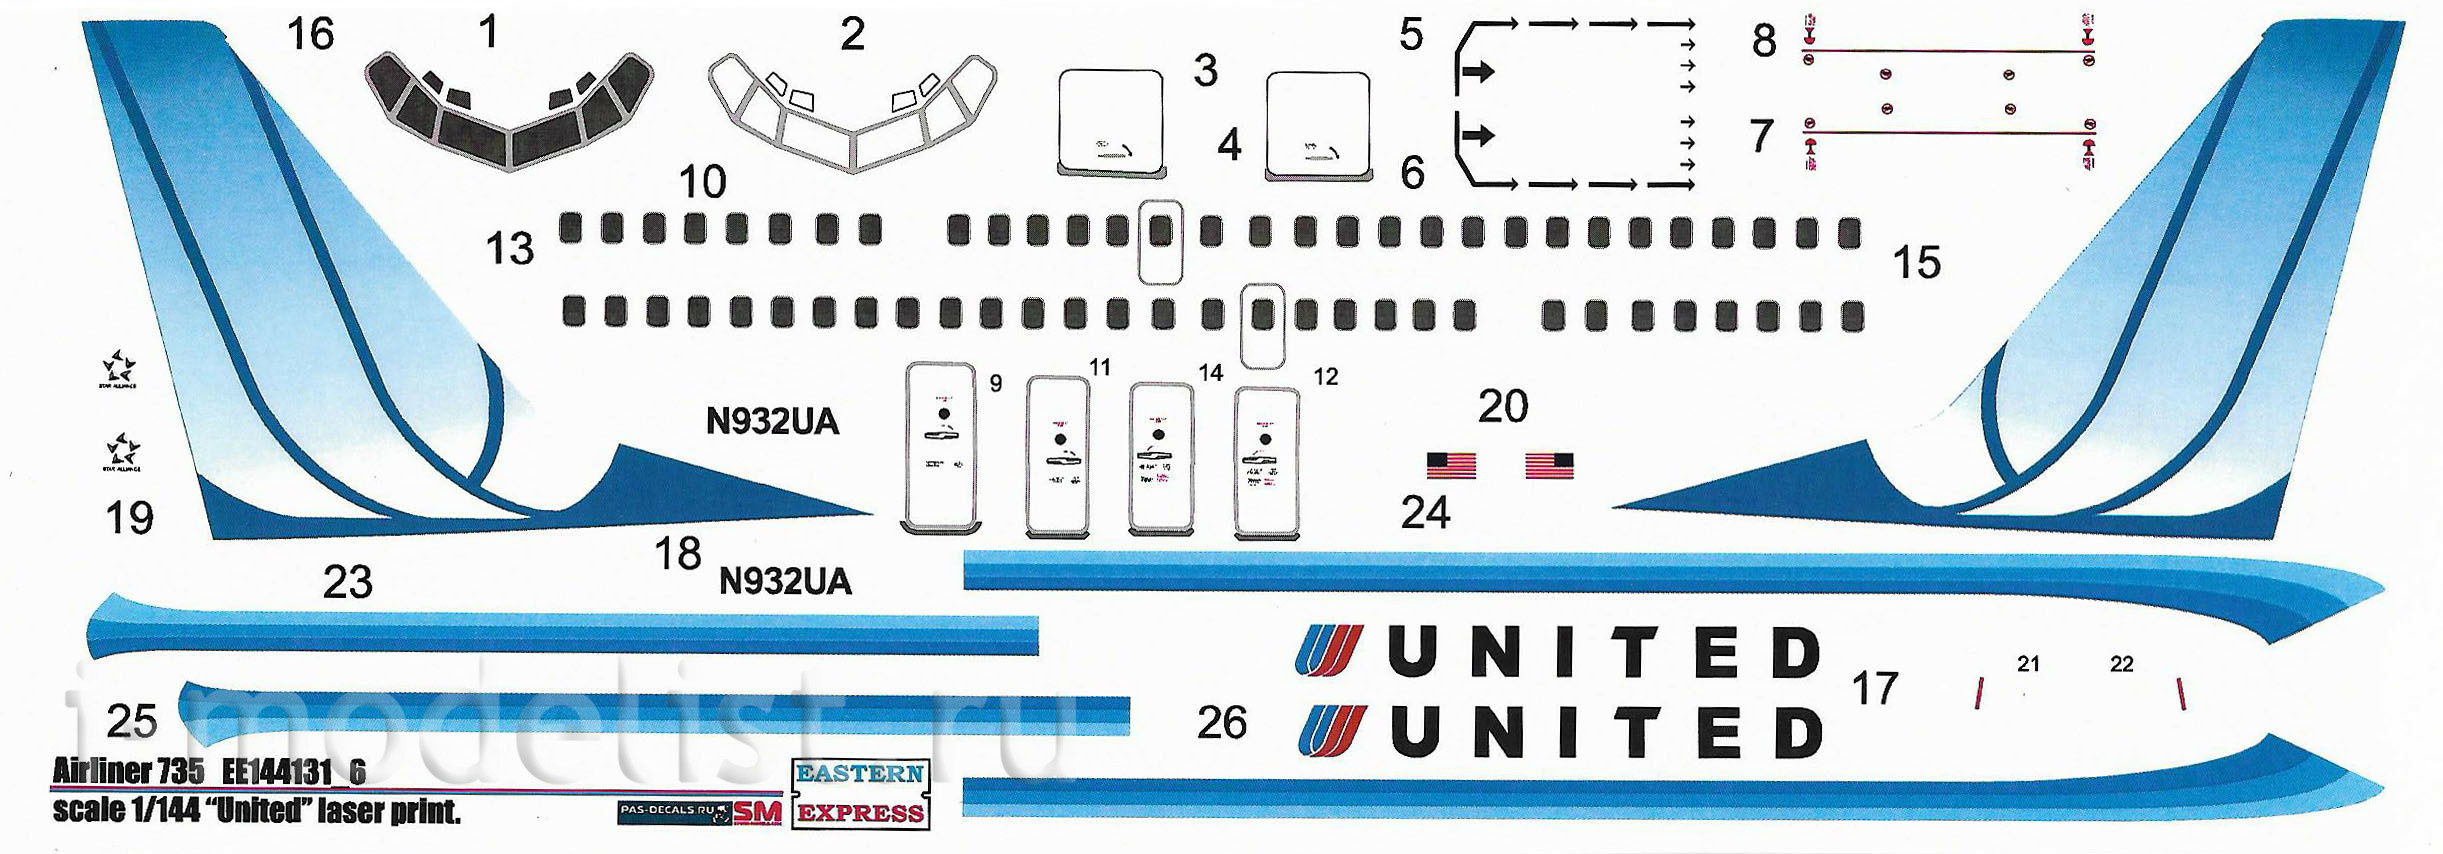 144131-6 Eastern Express 1/144 Scales 737-500 Airliner United